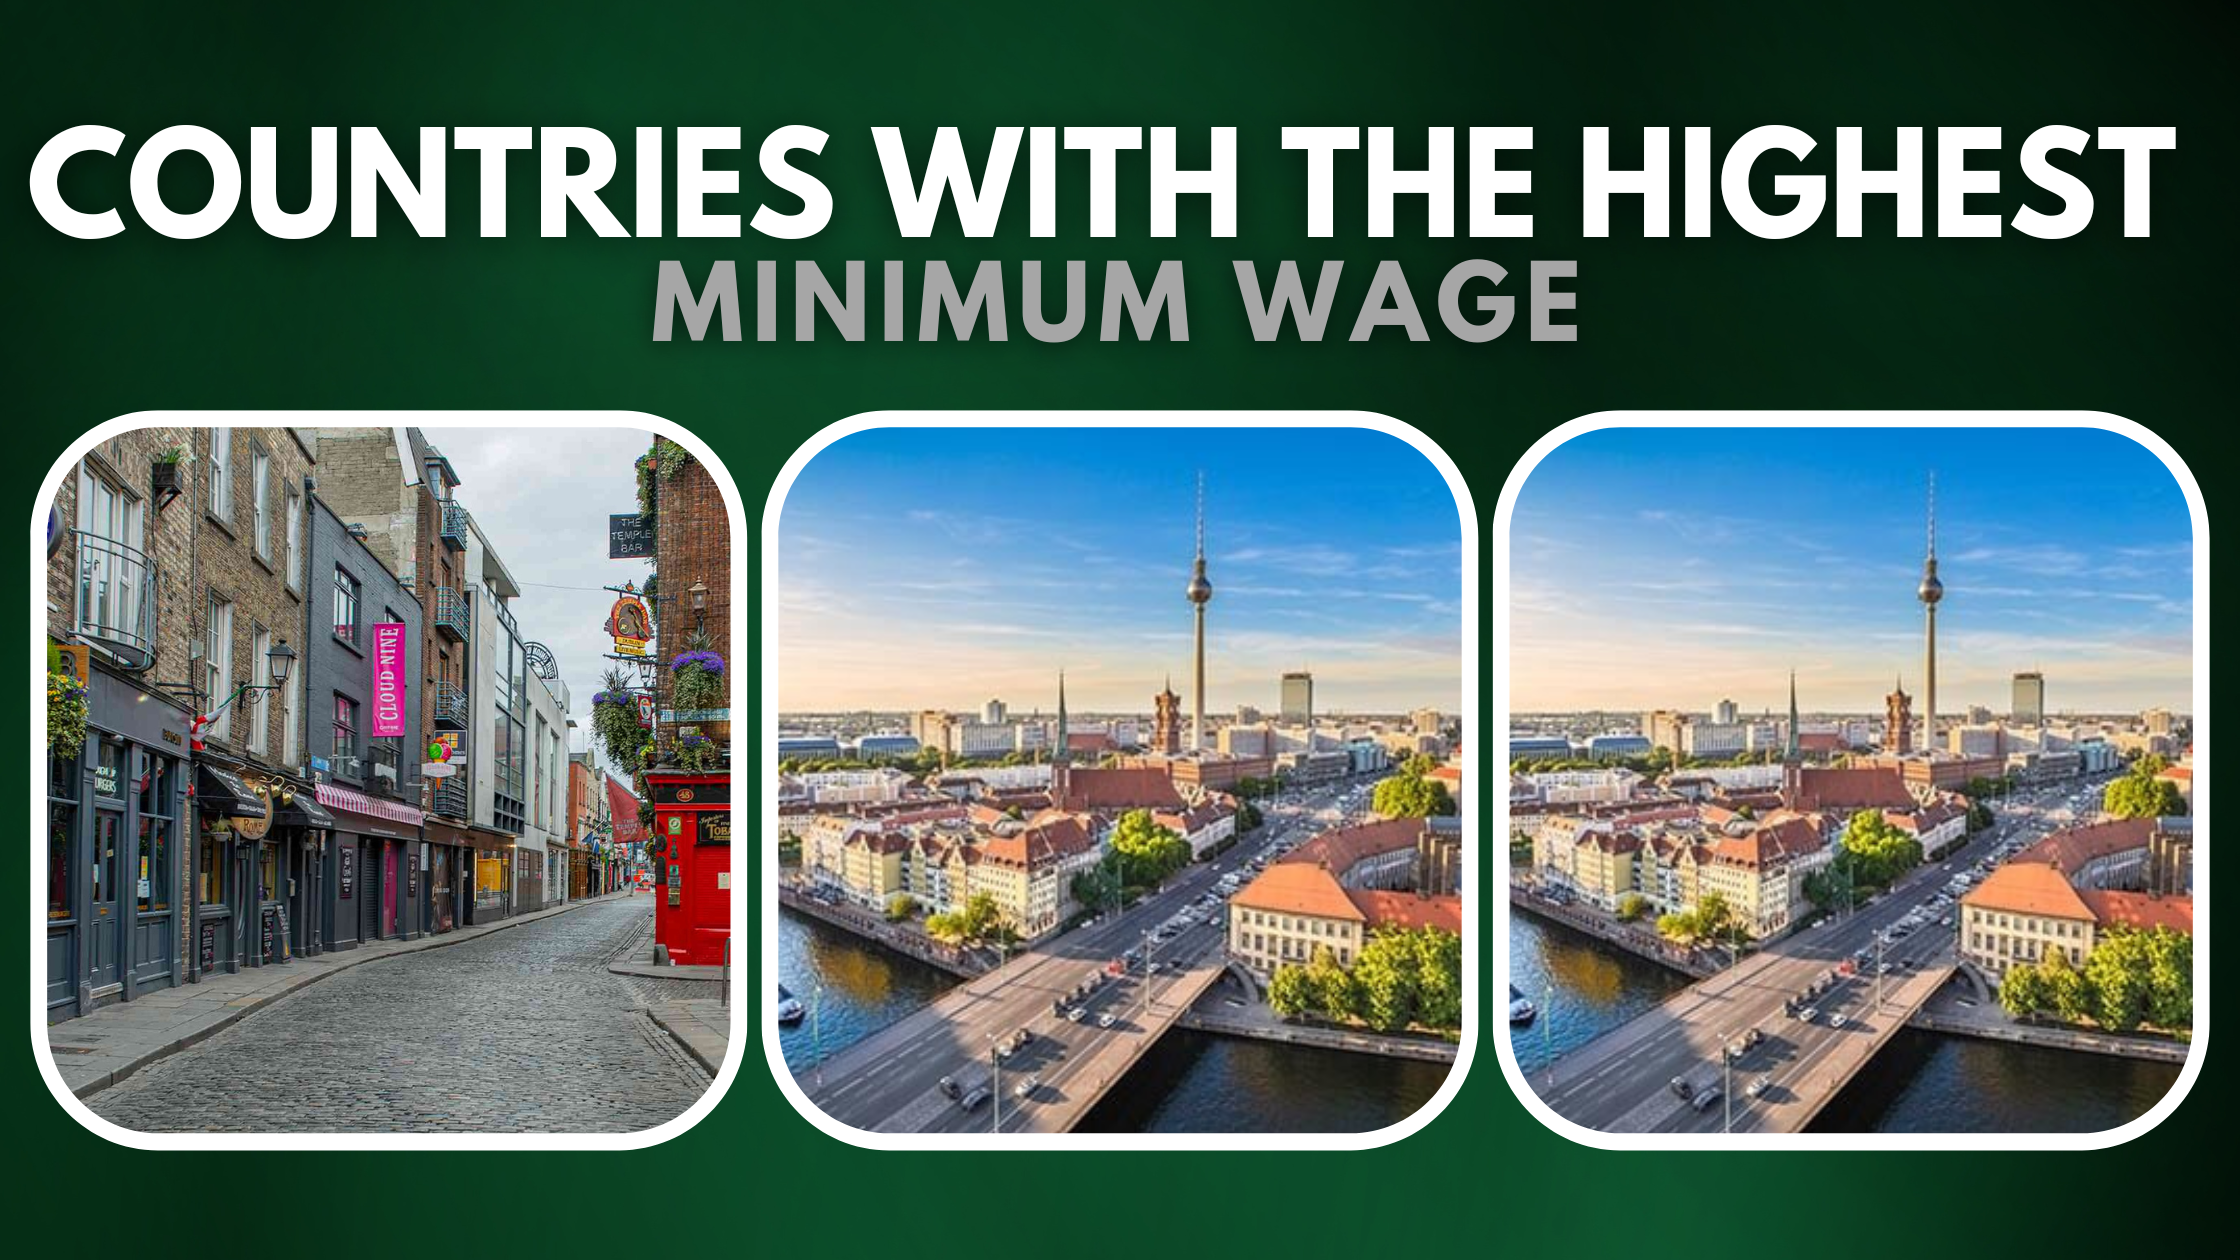 List of Top Countries With The Highest Minimum Wage